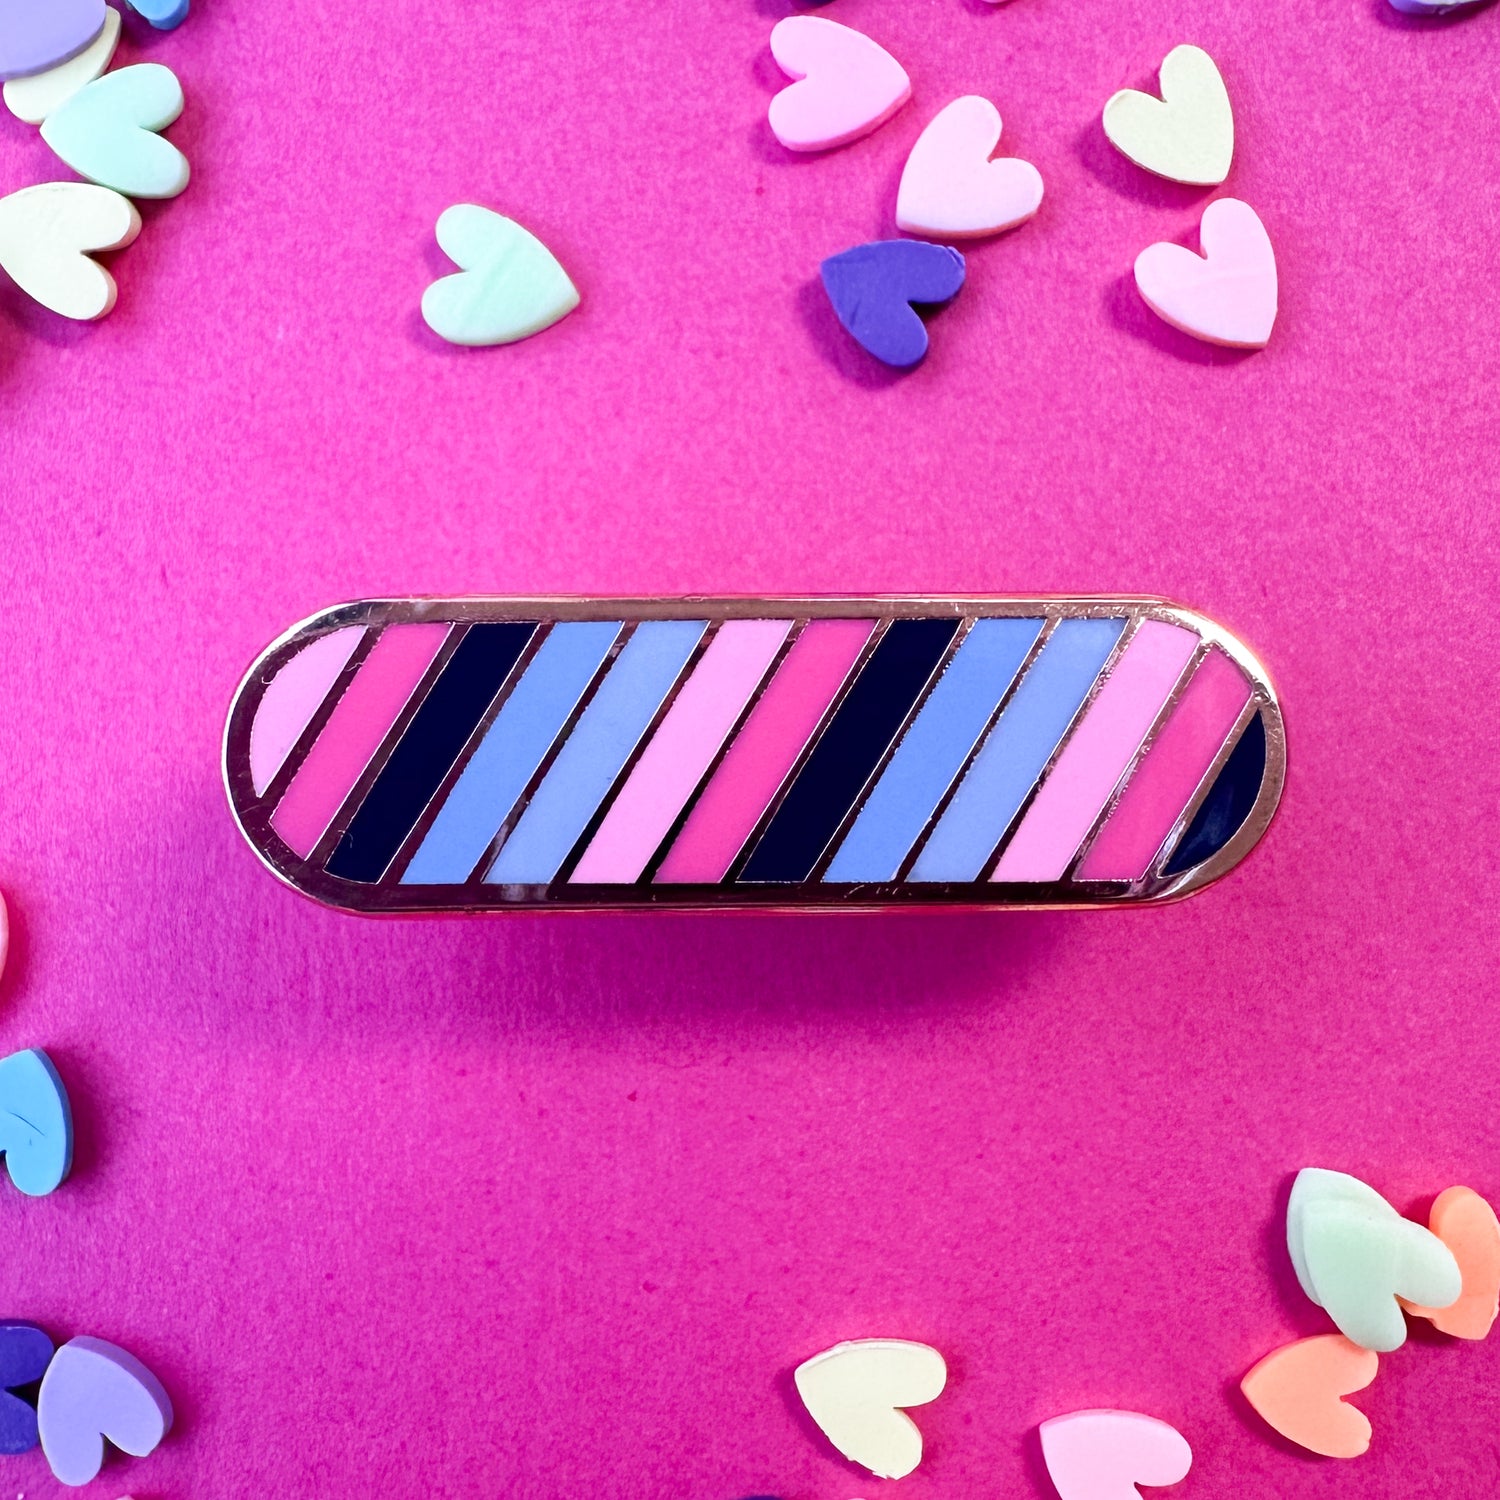 An oval shaped pin with diagonal stripes in the Omnisexual pride flag. The pin is on a hot pink background with heart confetti. 